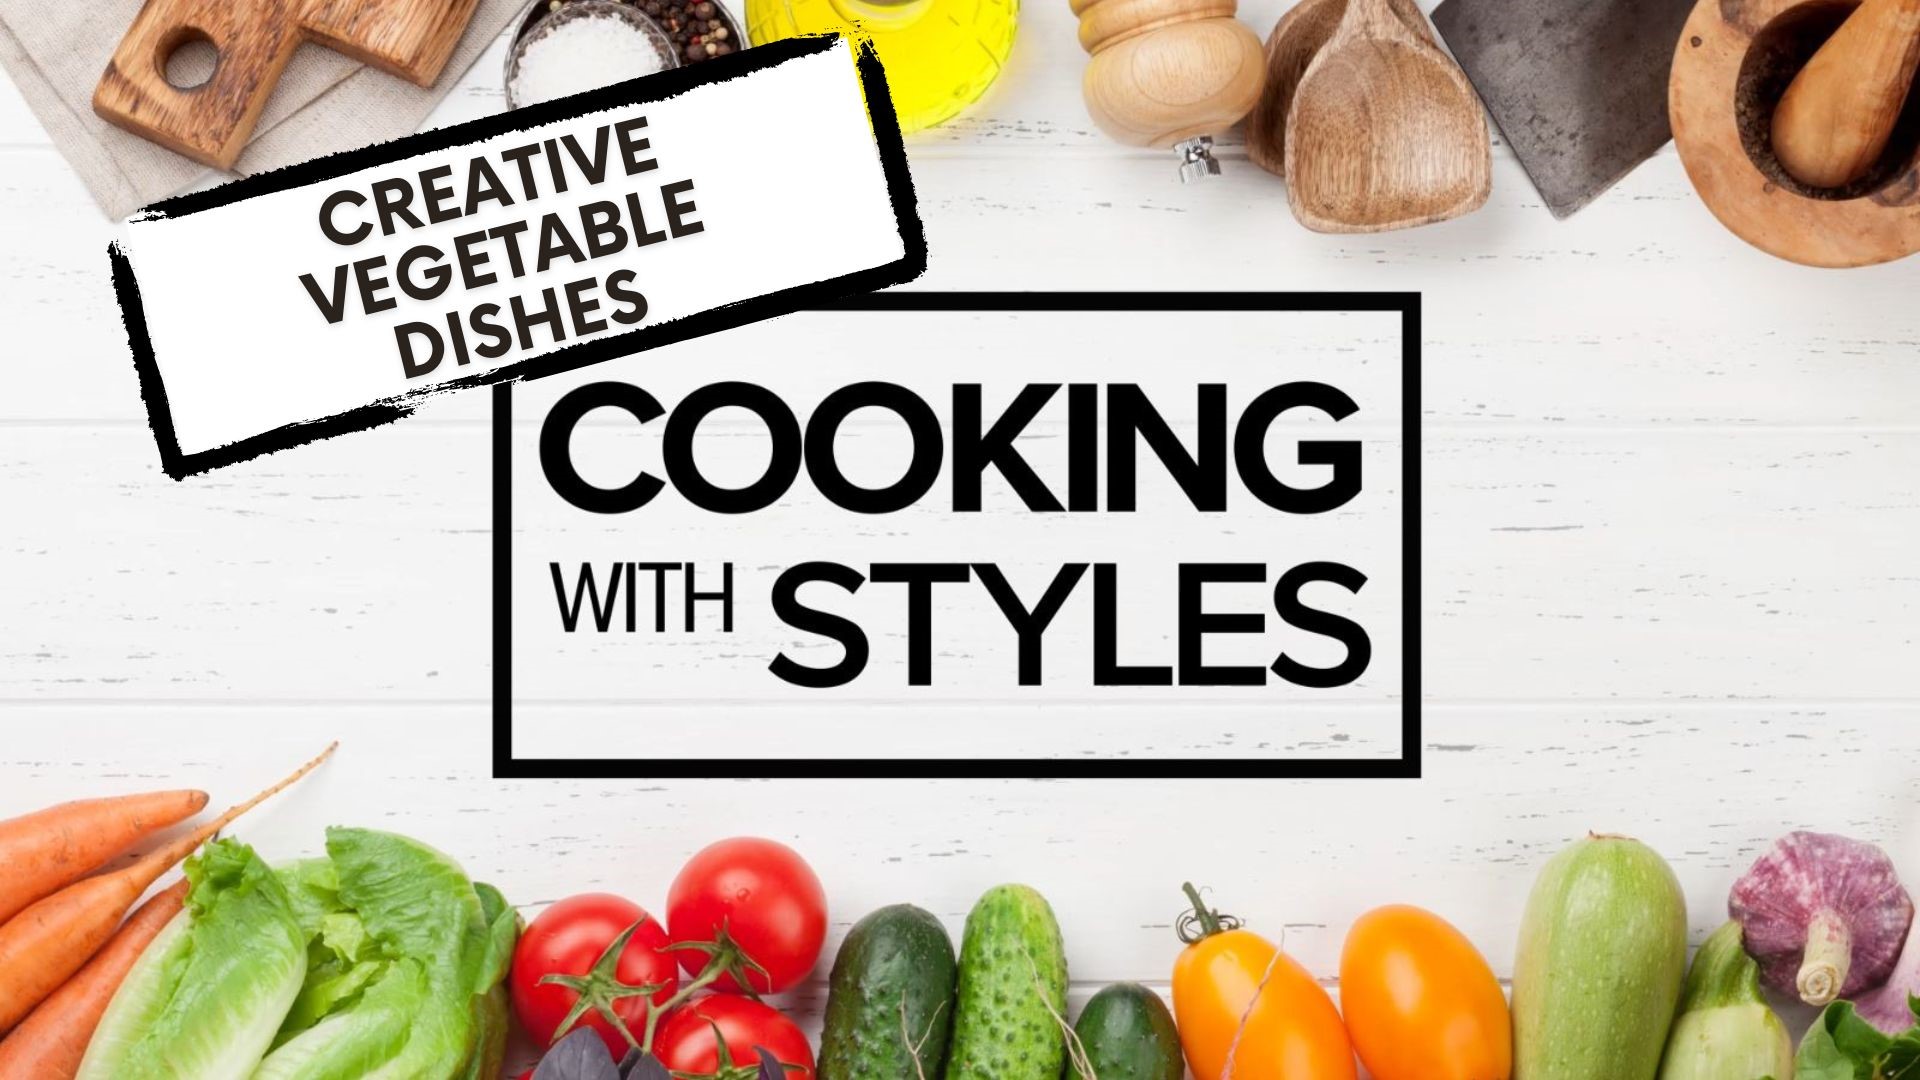 Shawn Styles shares creative recipes for vegetable main dishes and sides. Update your mashed potatoes recipe or try out a new curry dish with these dishes.